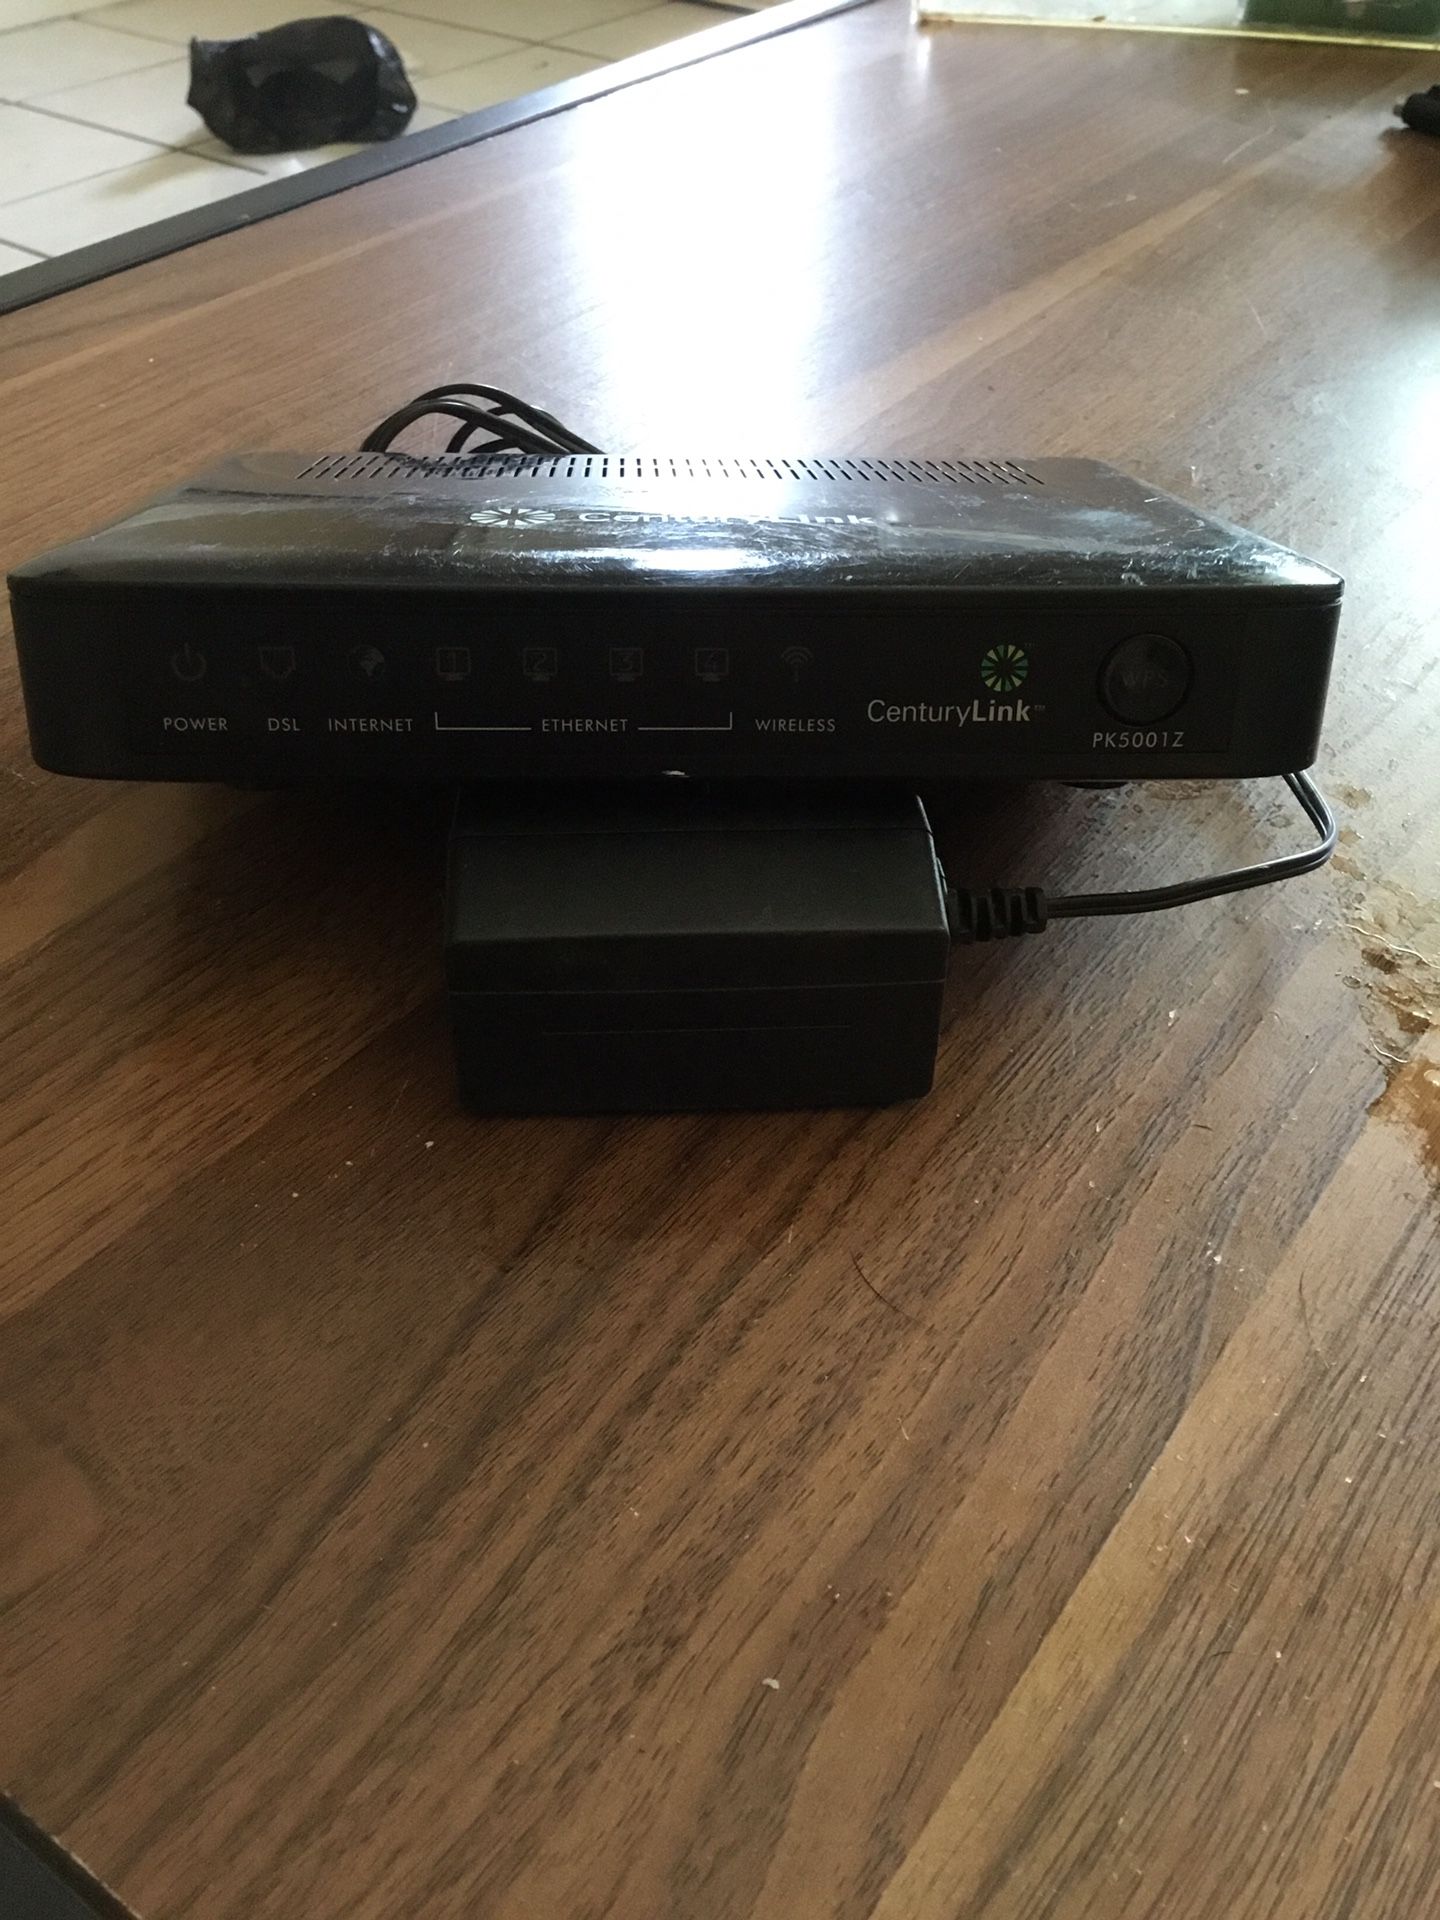 Centurylink PK5001z modem/router stop renting and getting nickel and dimes